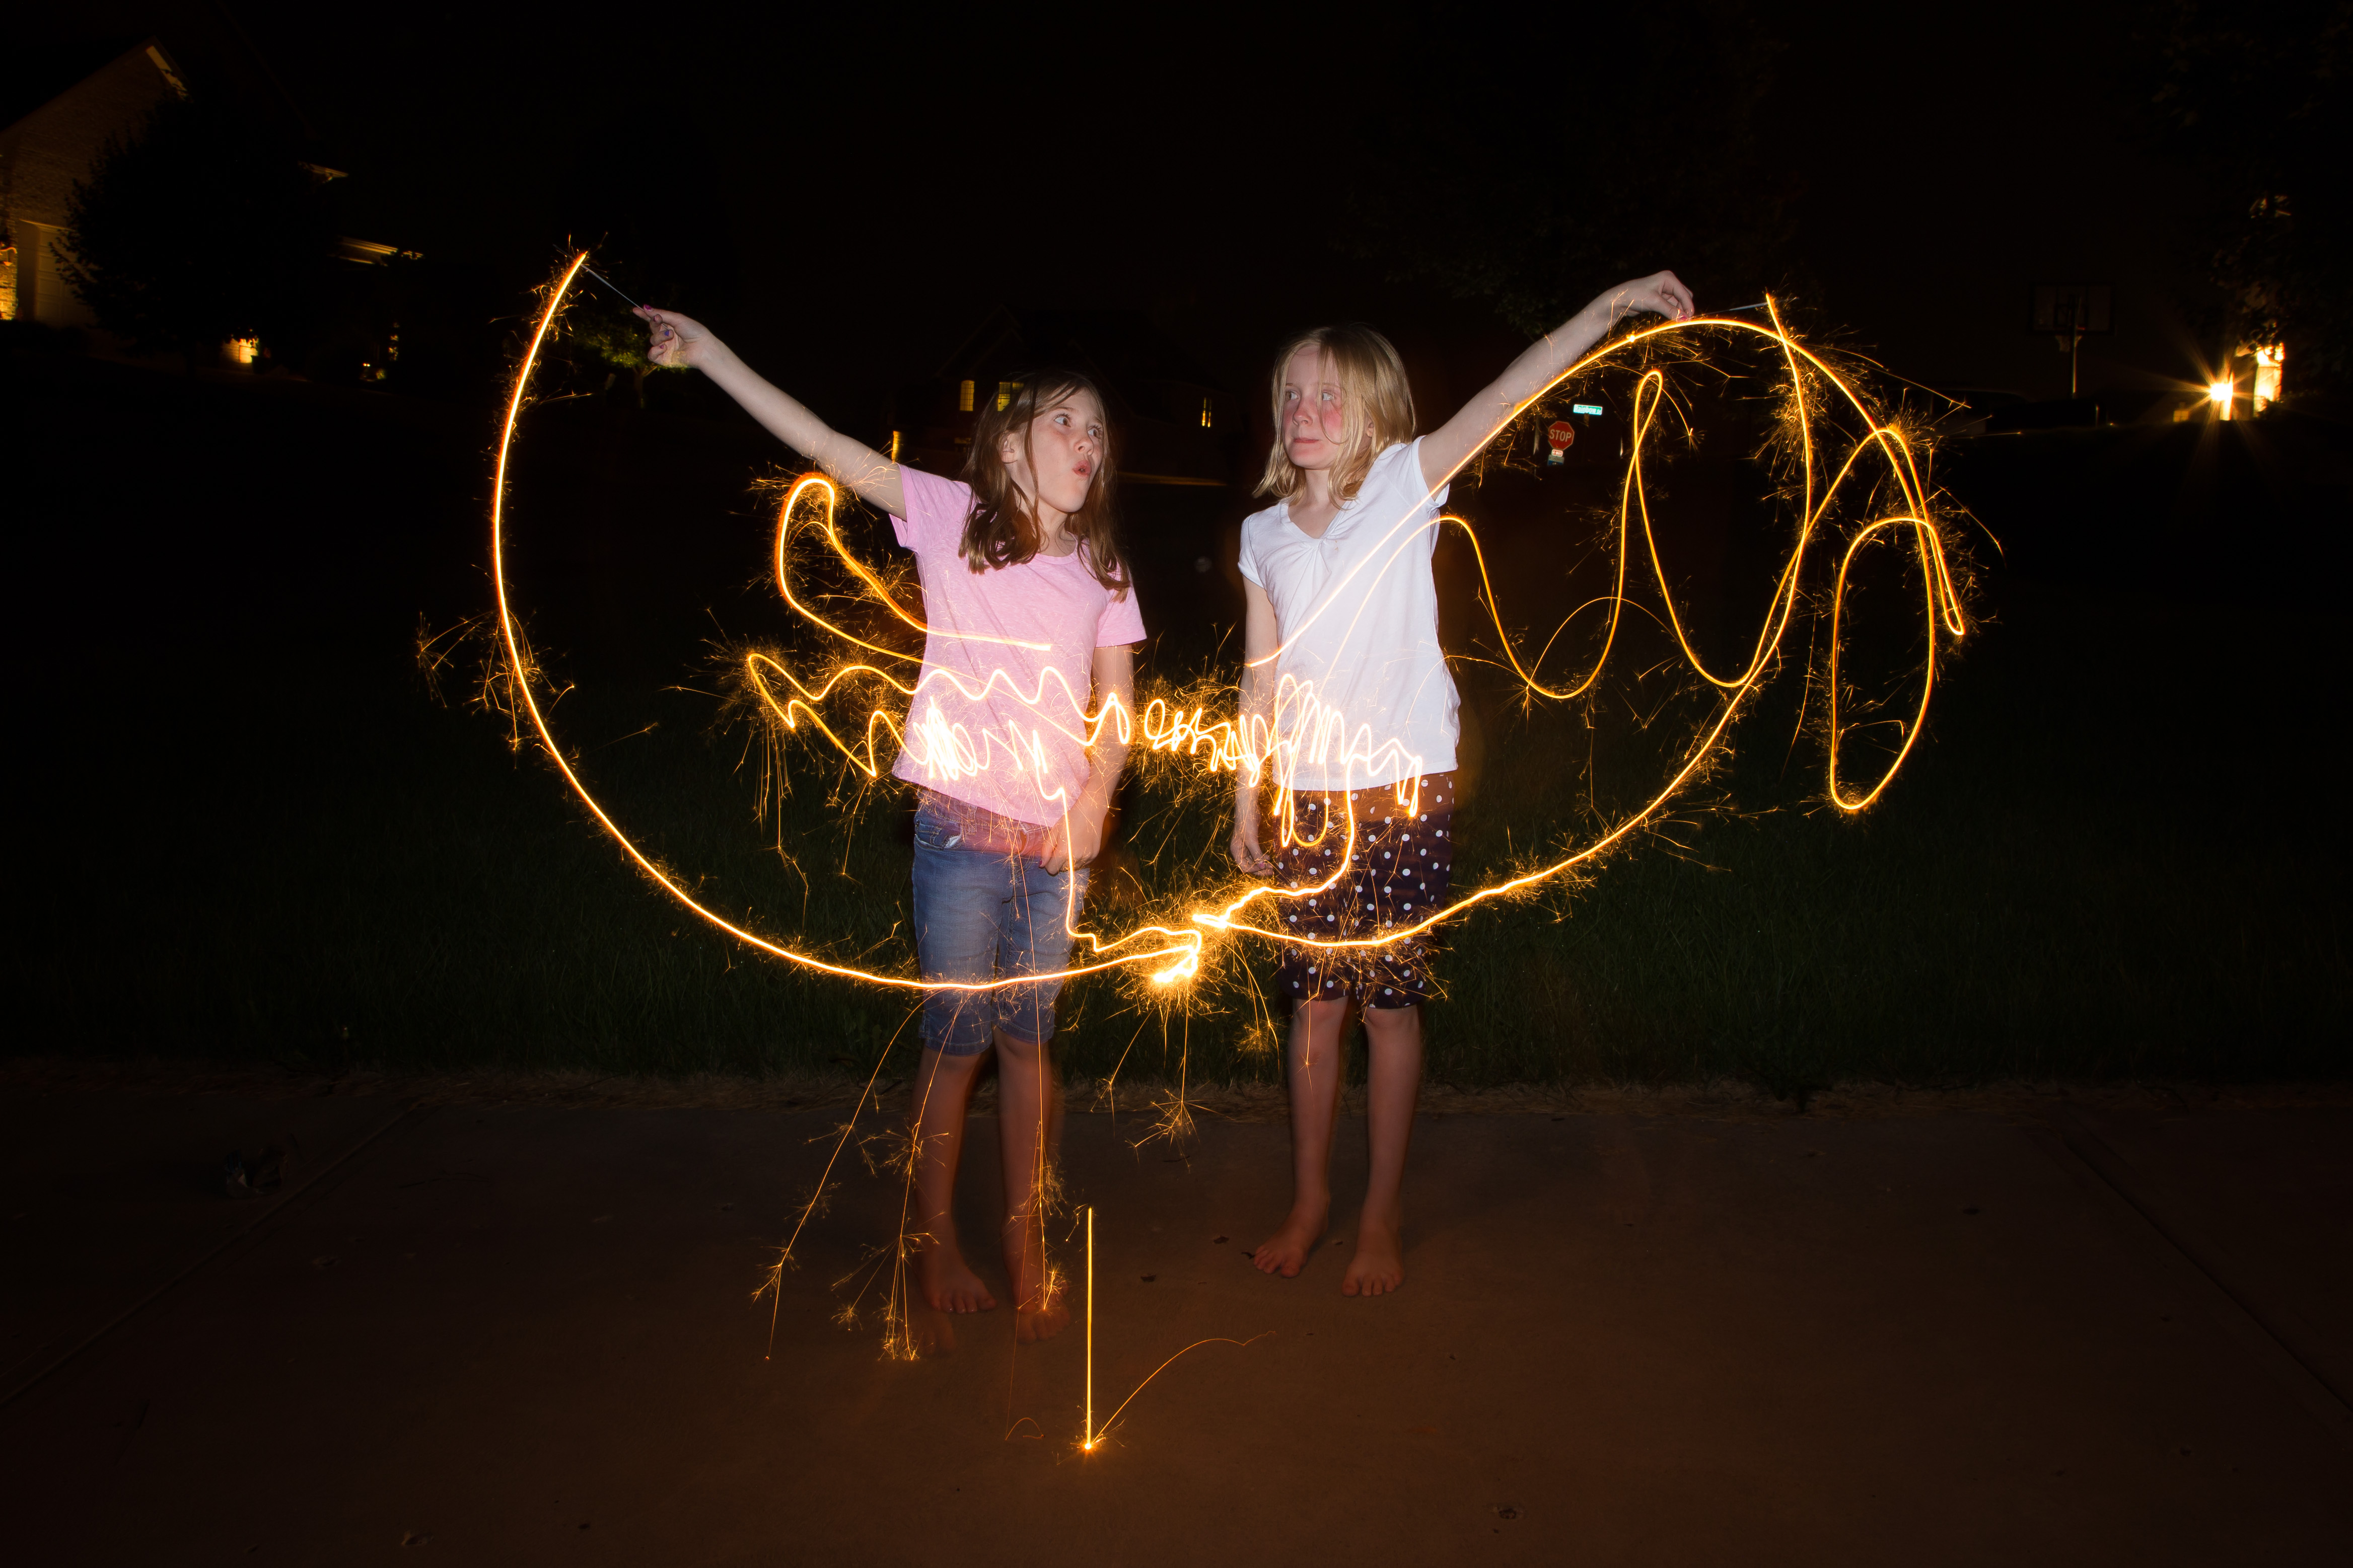 2015-07-04;Sparklers and pool 2 (9 of 12).JPG